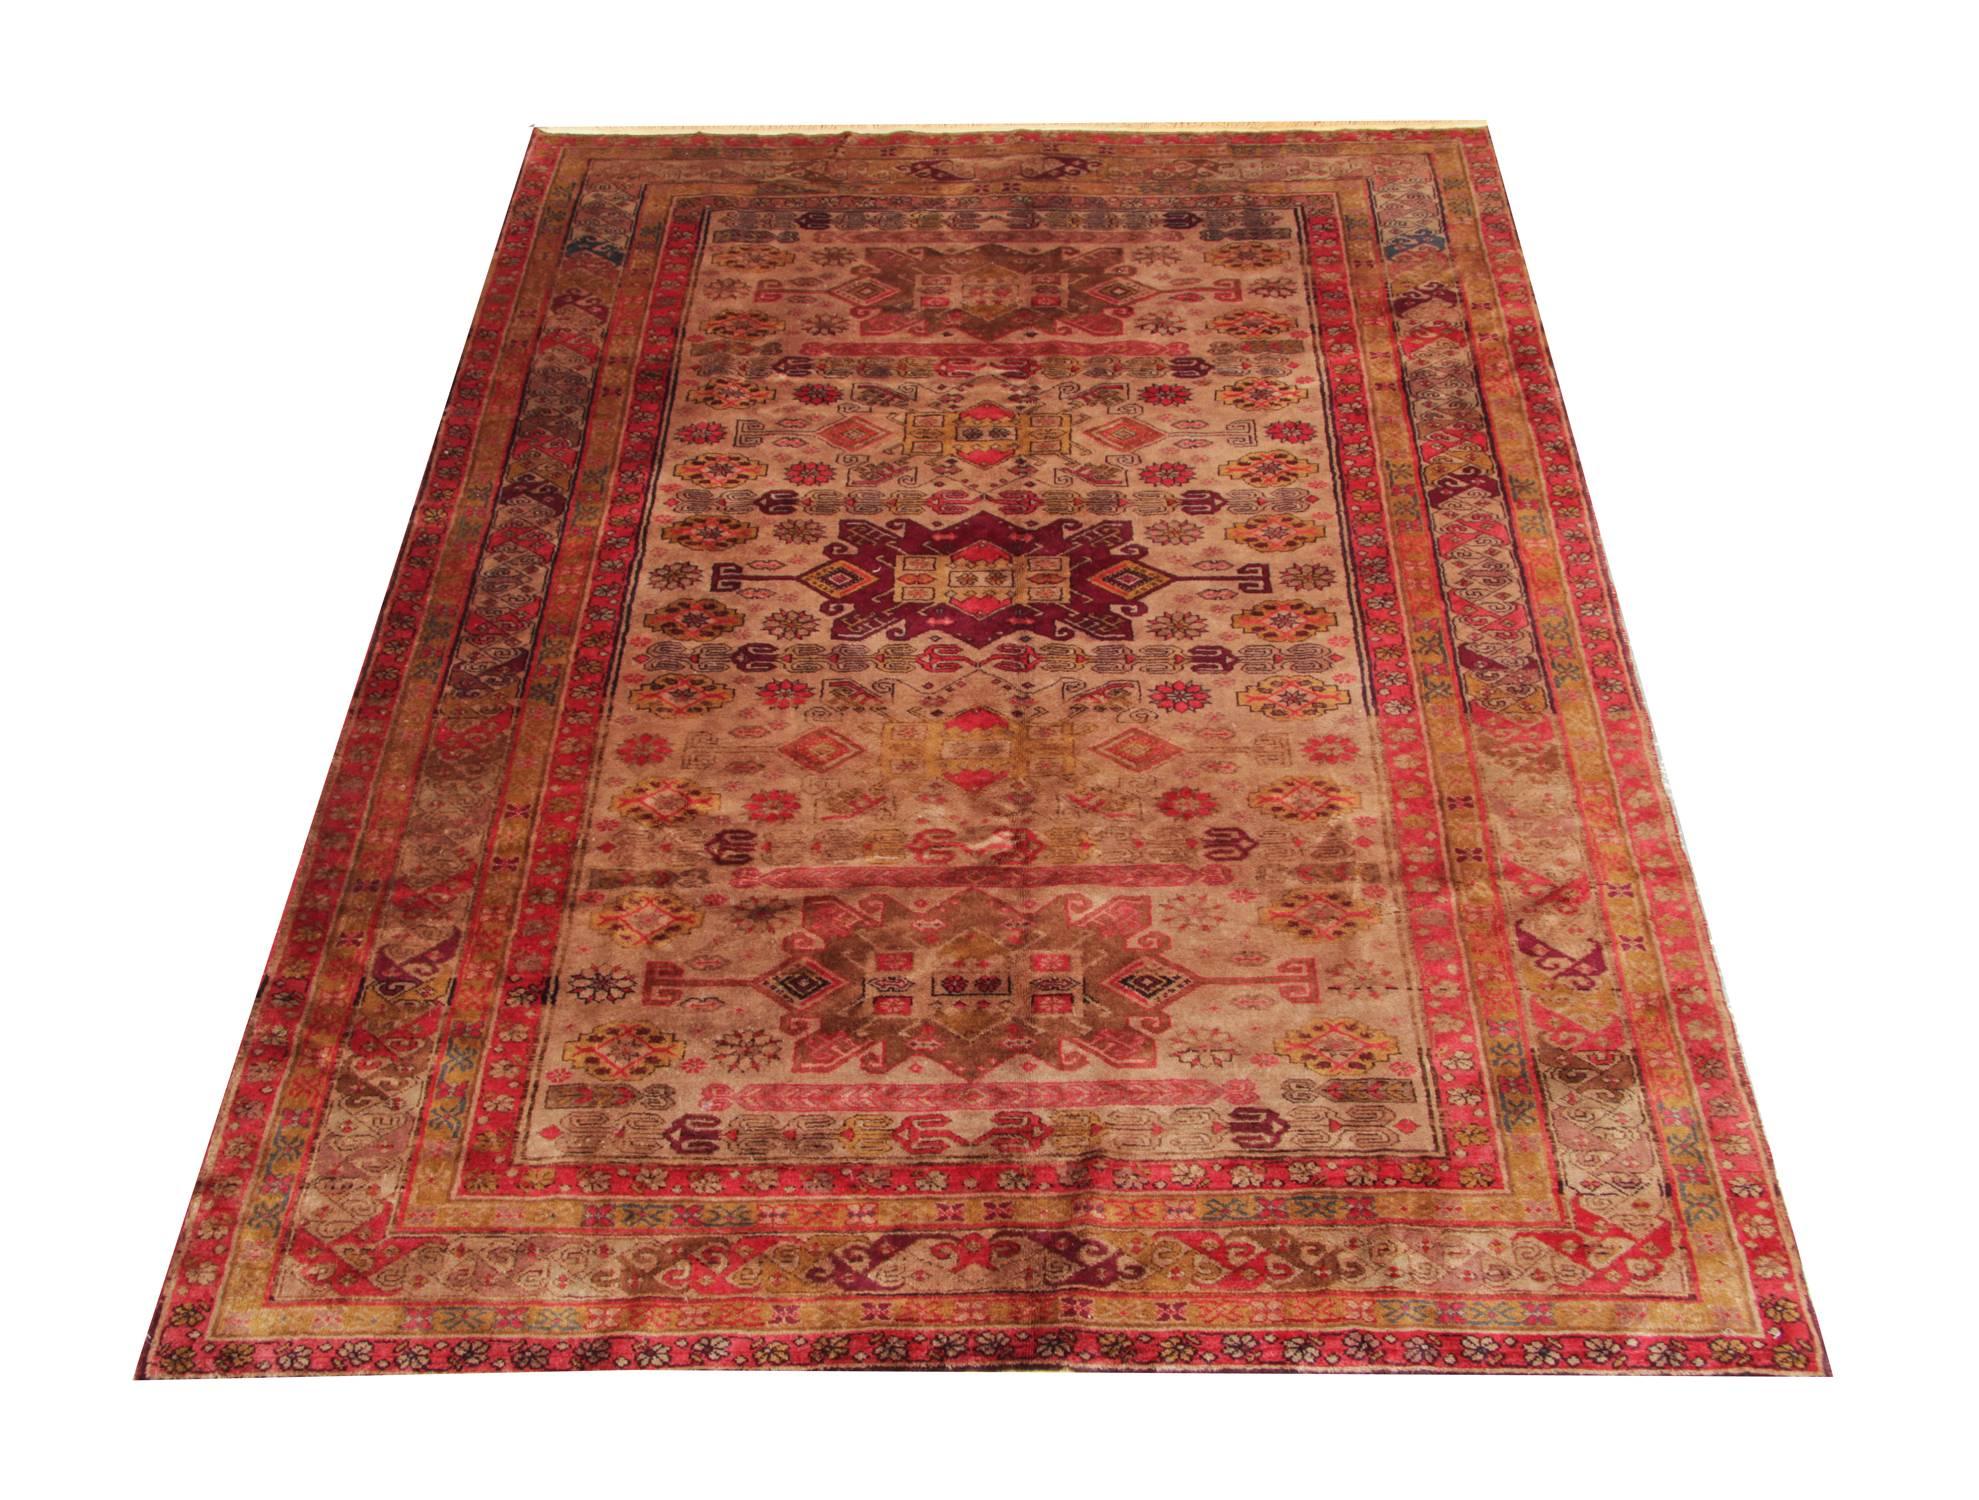 This is an antique Caucasian tribal rug from Karabagh.  It is a geometric rug with an excellent colour combination and the contrasting gold, purple and rust colours, look unique on this carpet. These antique rugs are back from the 1890s and could